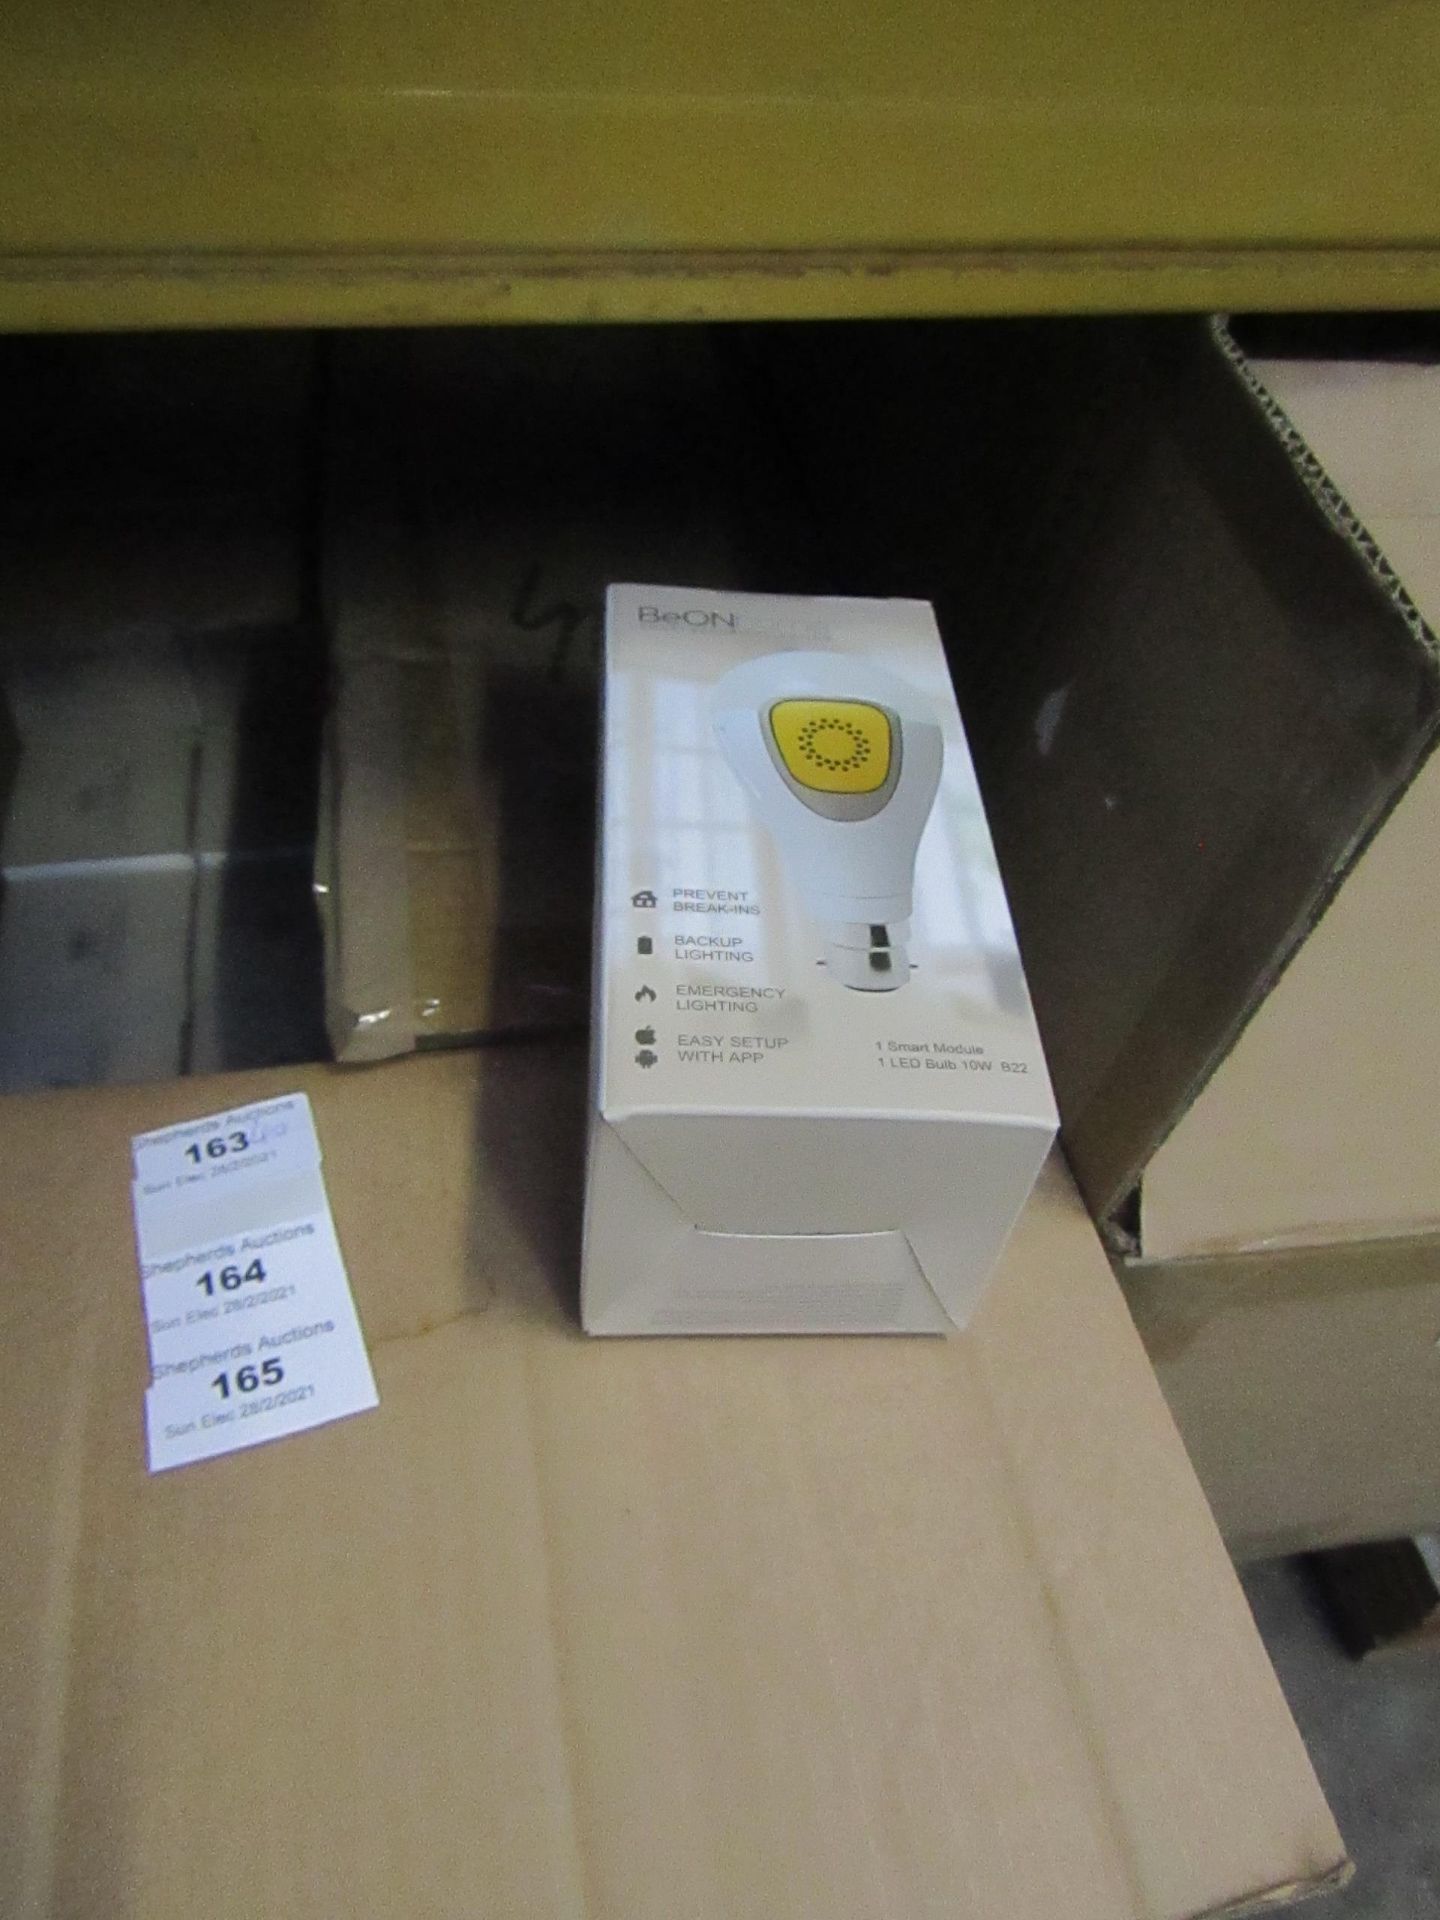 40x BeonHome, Smart Security Lighting, New and Boxed